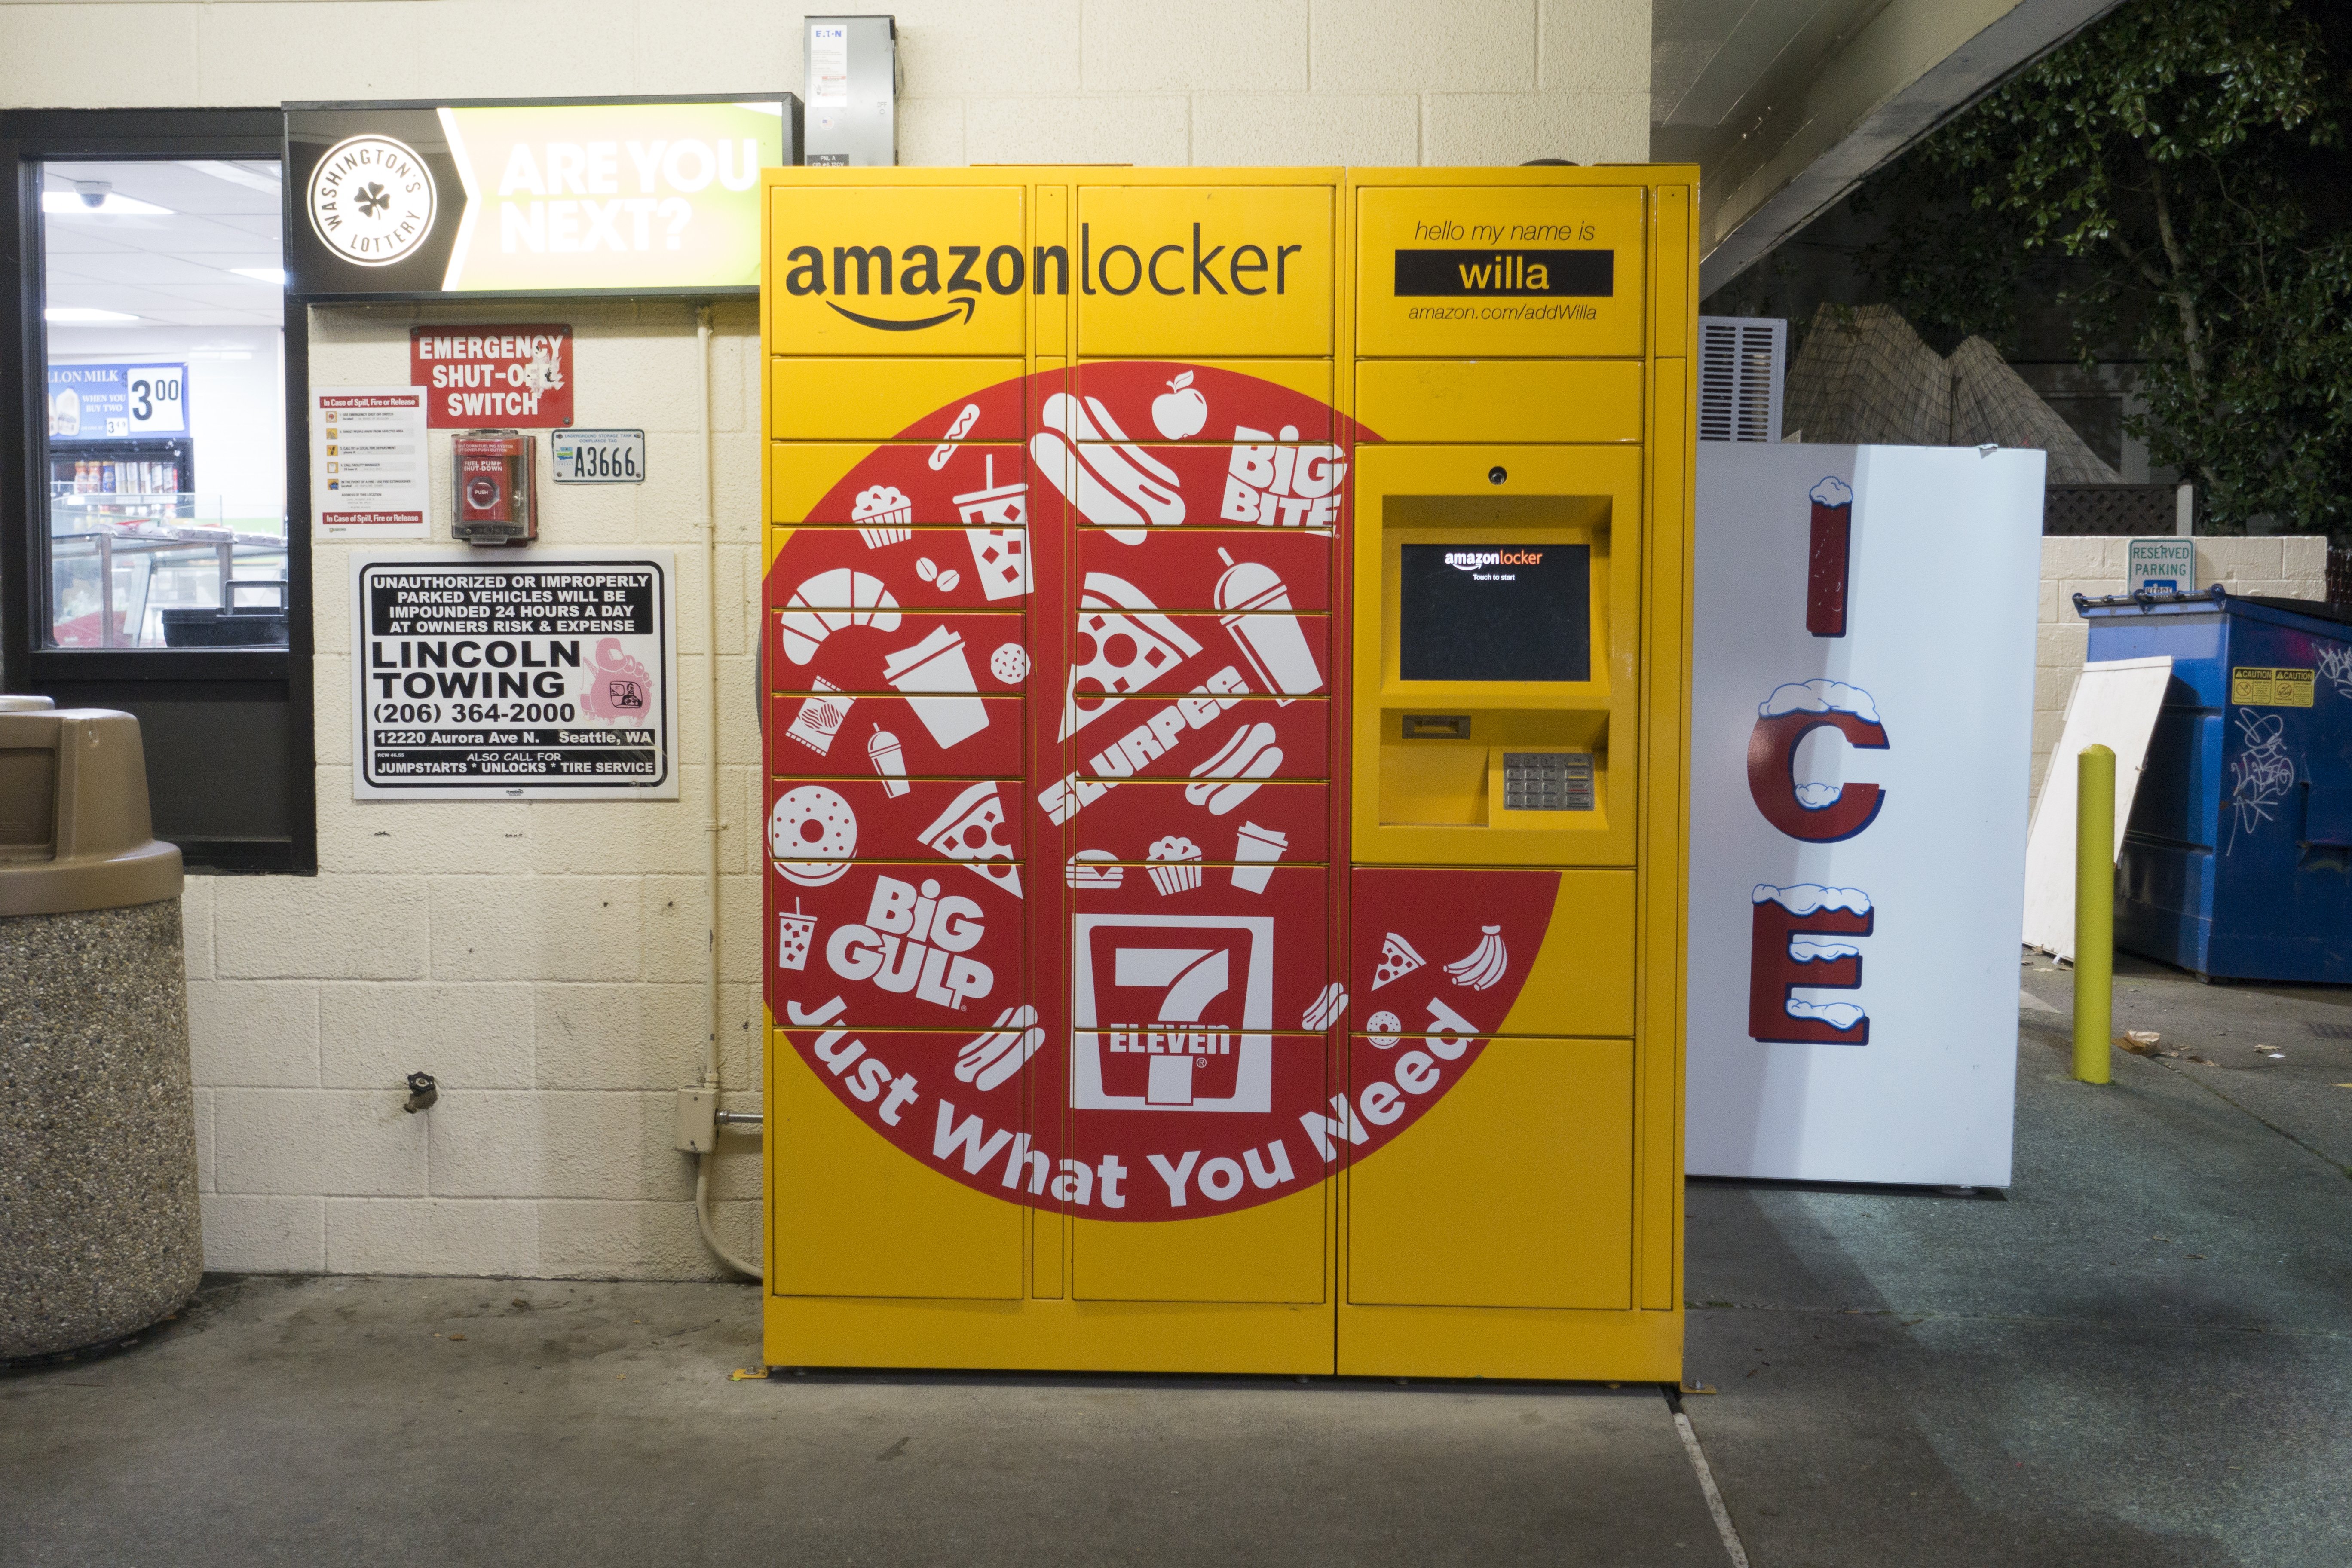 Buying ad space on Amazon lockers can help push customers to go to Amazon product pages.